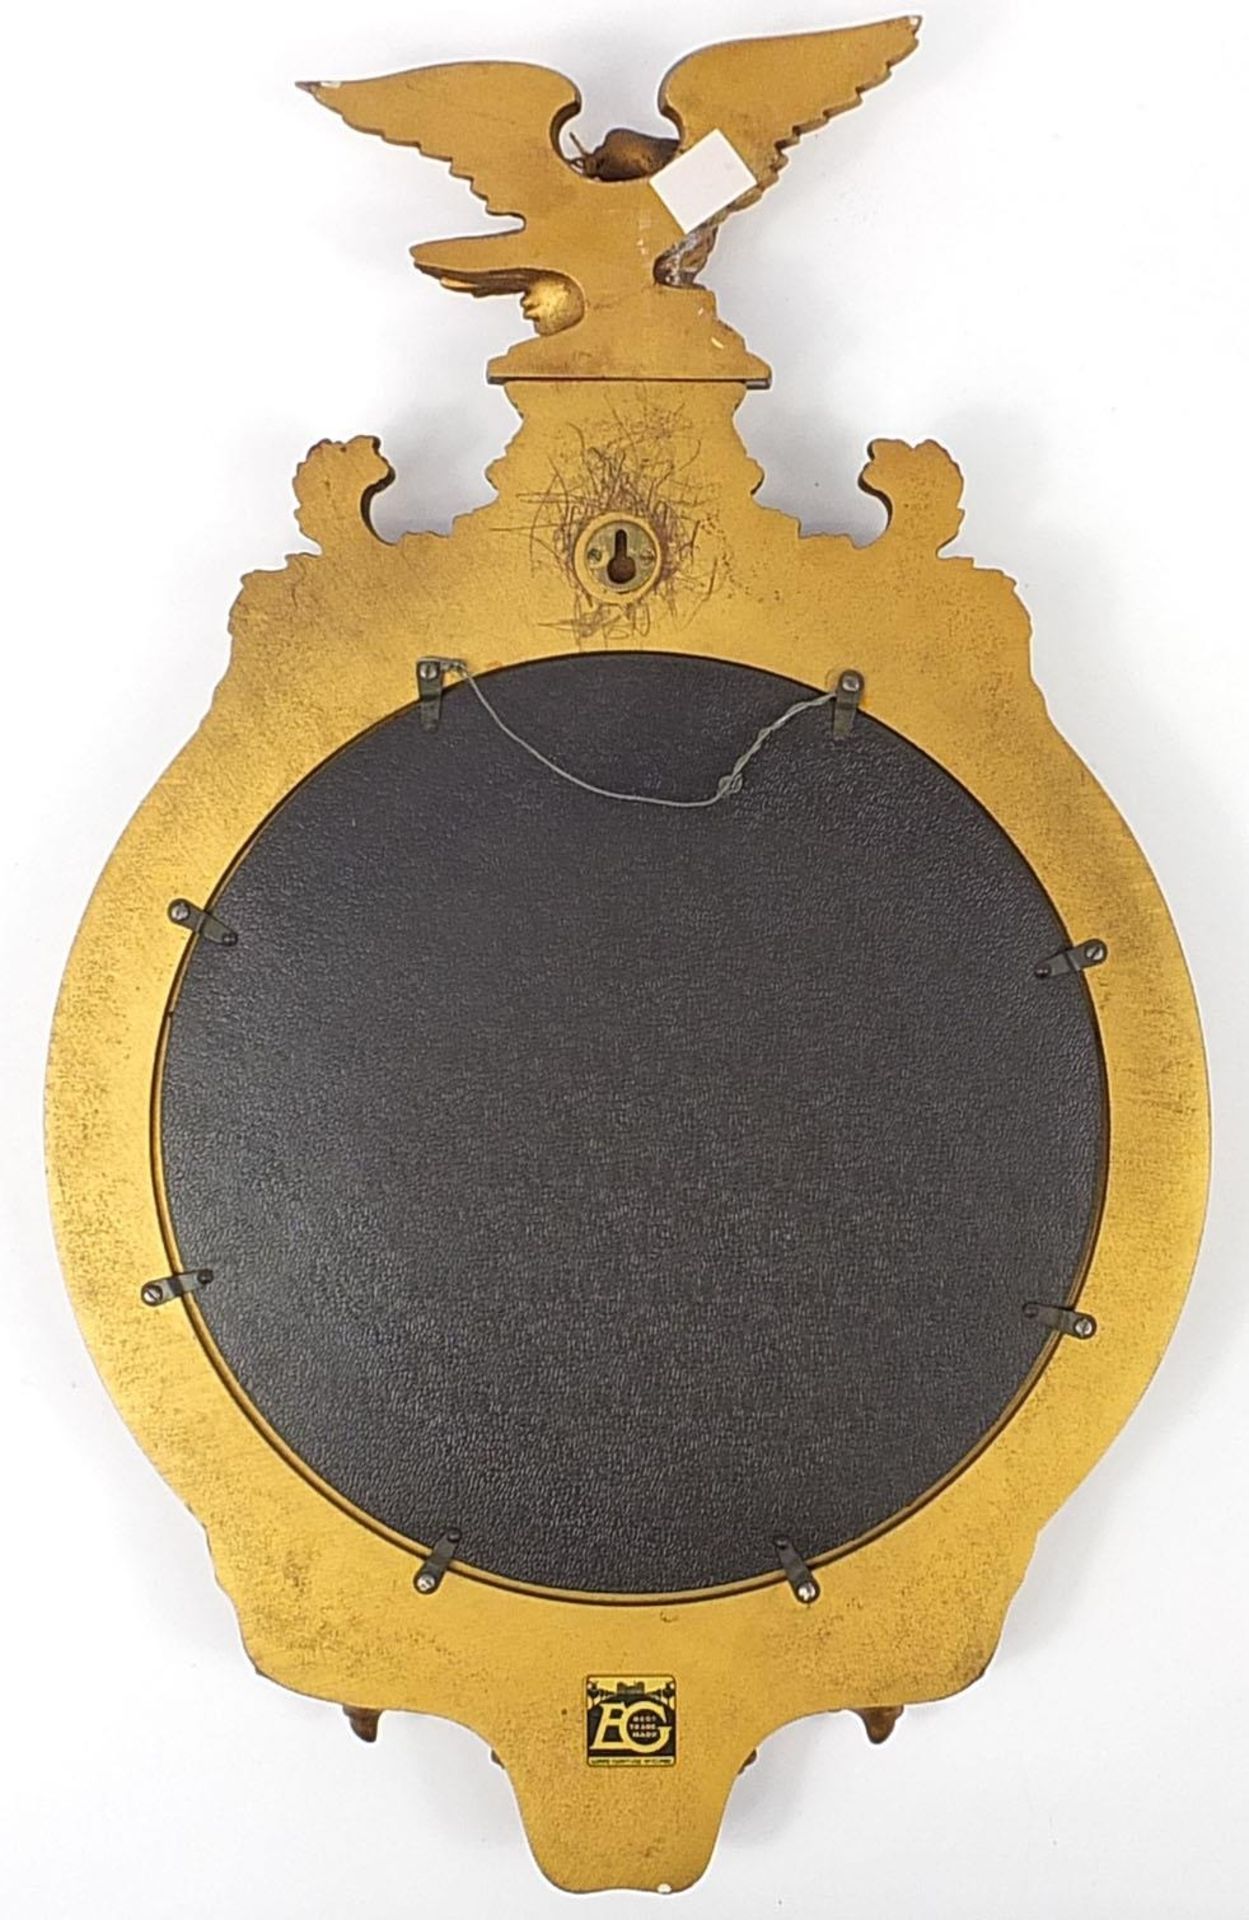 Gilt framed convex mirror with eagle crest, 67cm high x 42cm wide - Image 2 of 3